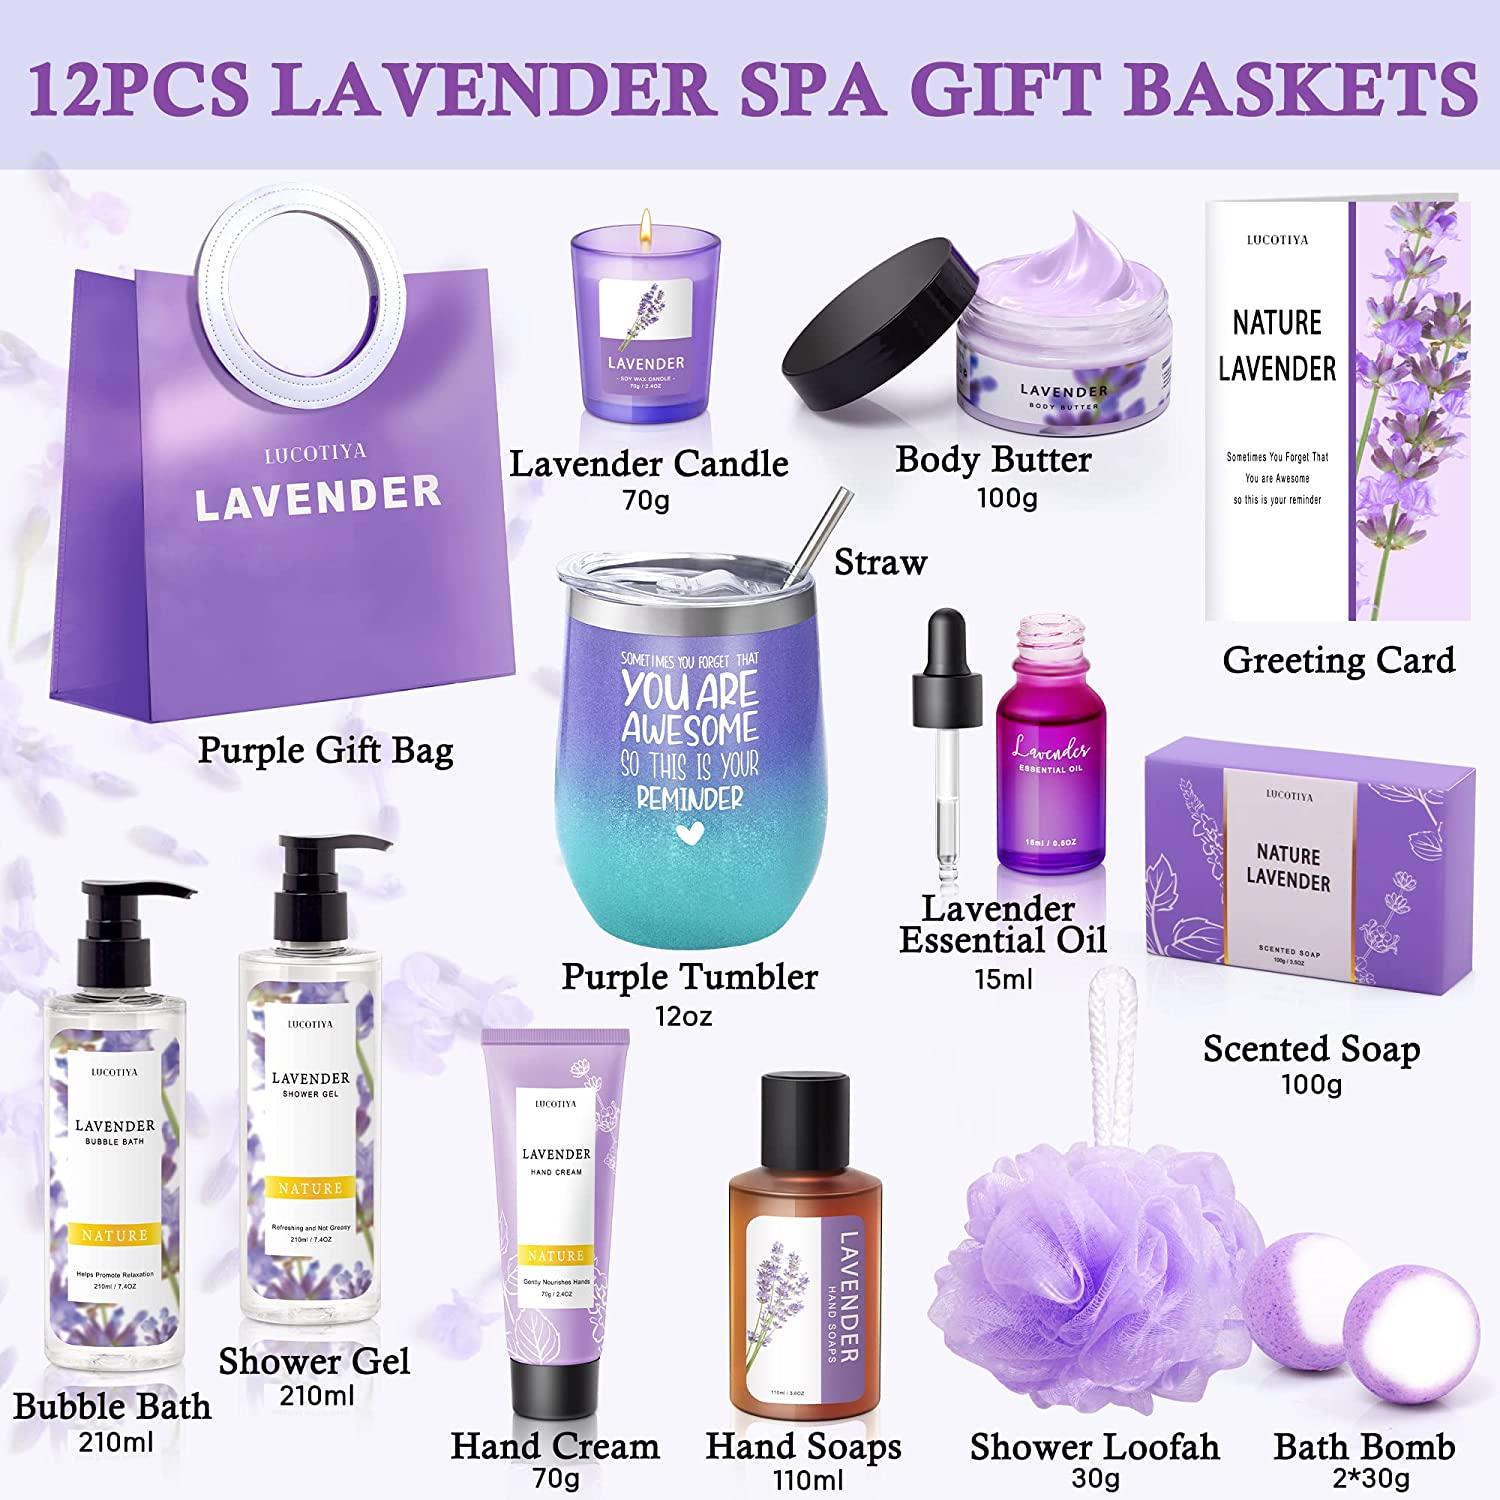 Gifts for Women, Birthday Gifts for Women Self Care Gift for Women Pamper  Gift Basket for Women Her,Friends,Mom,Wife 11 pcs Lavender Gift Unique Gift